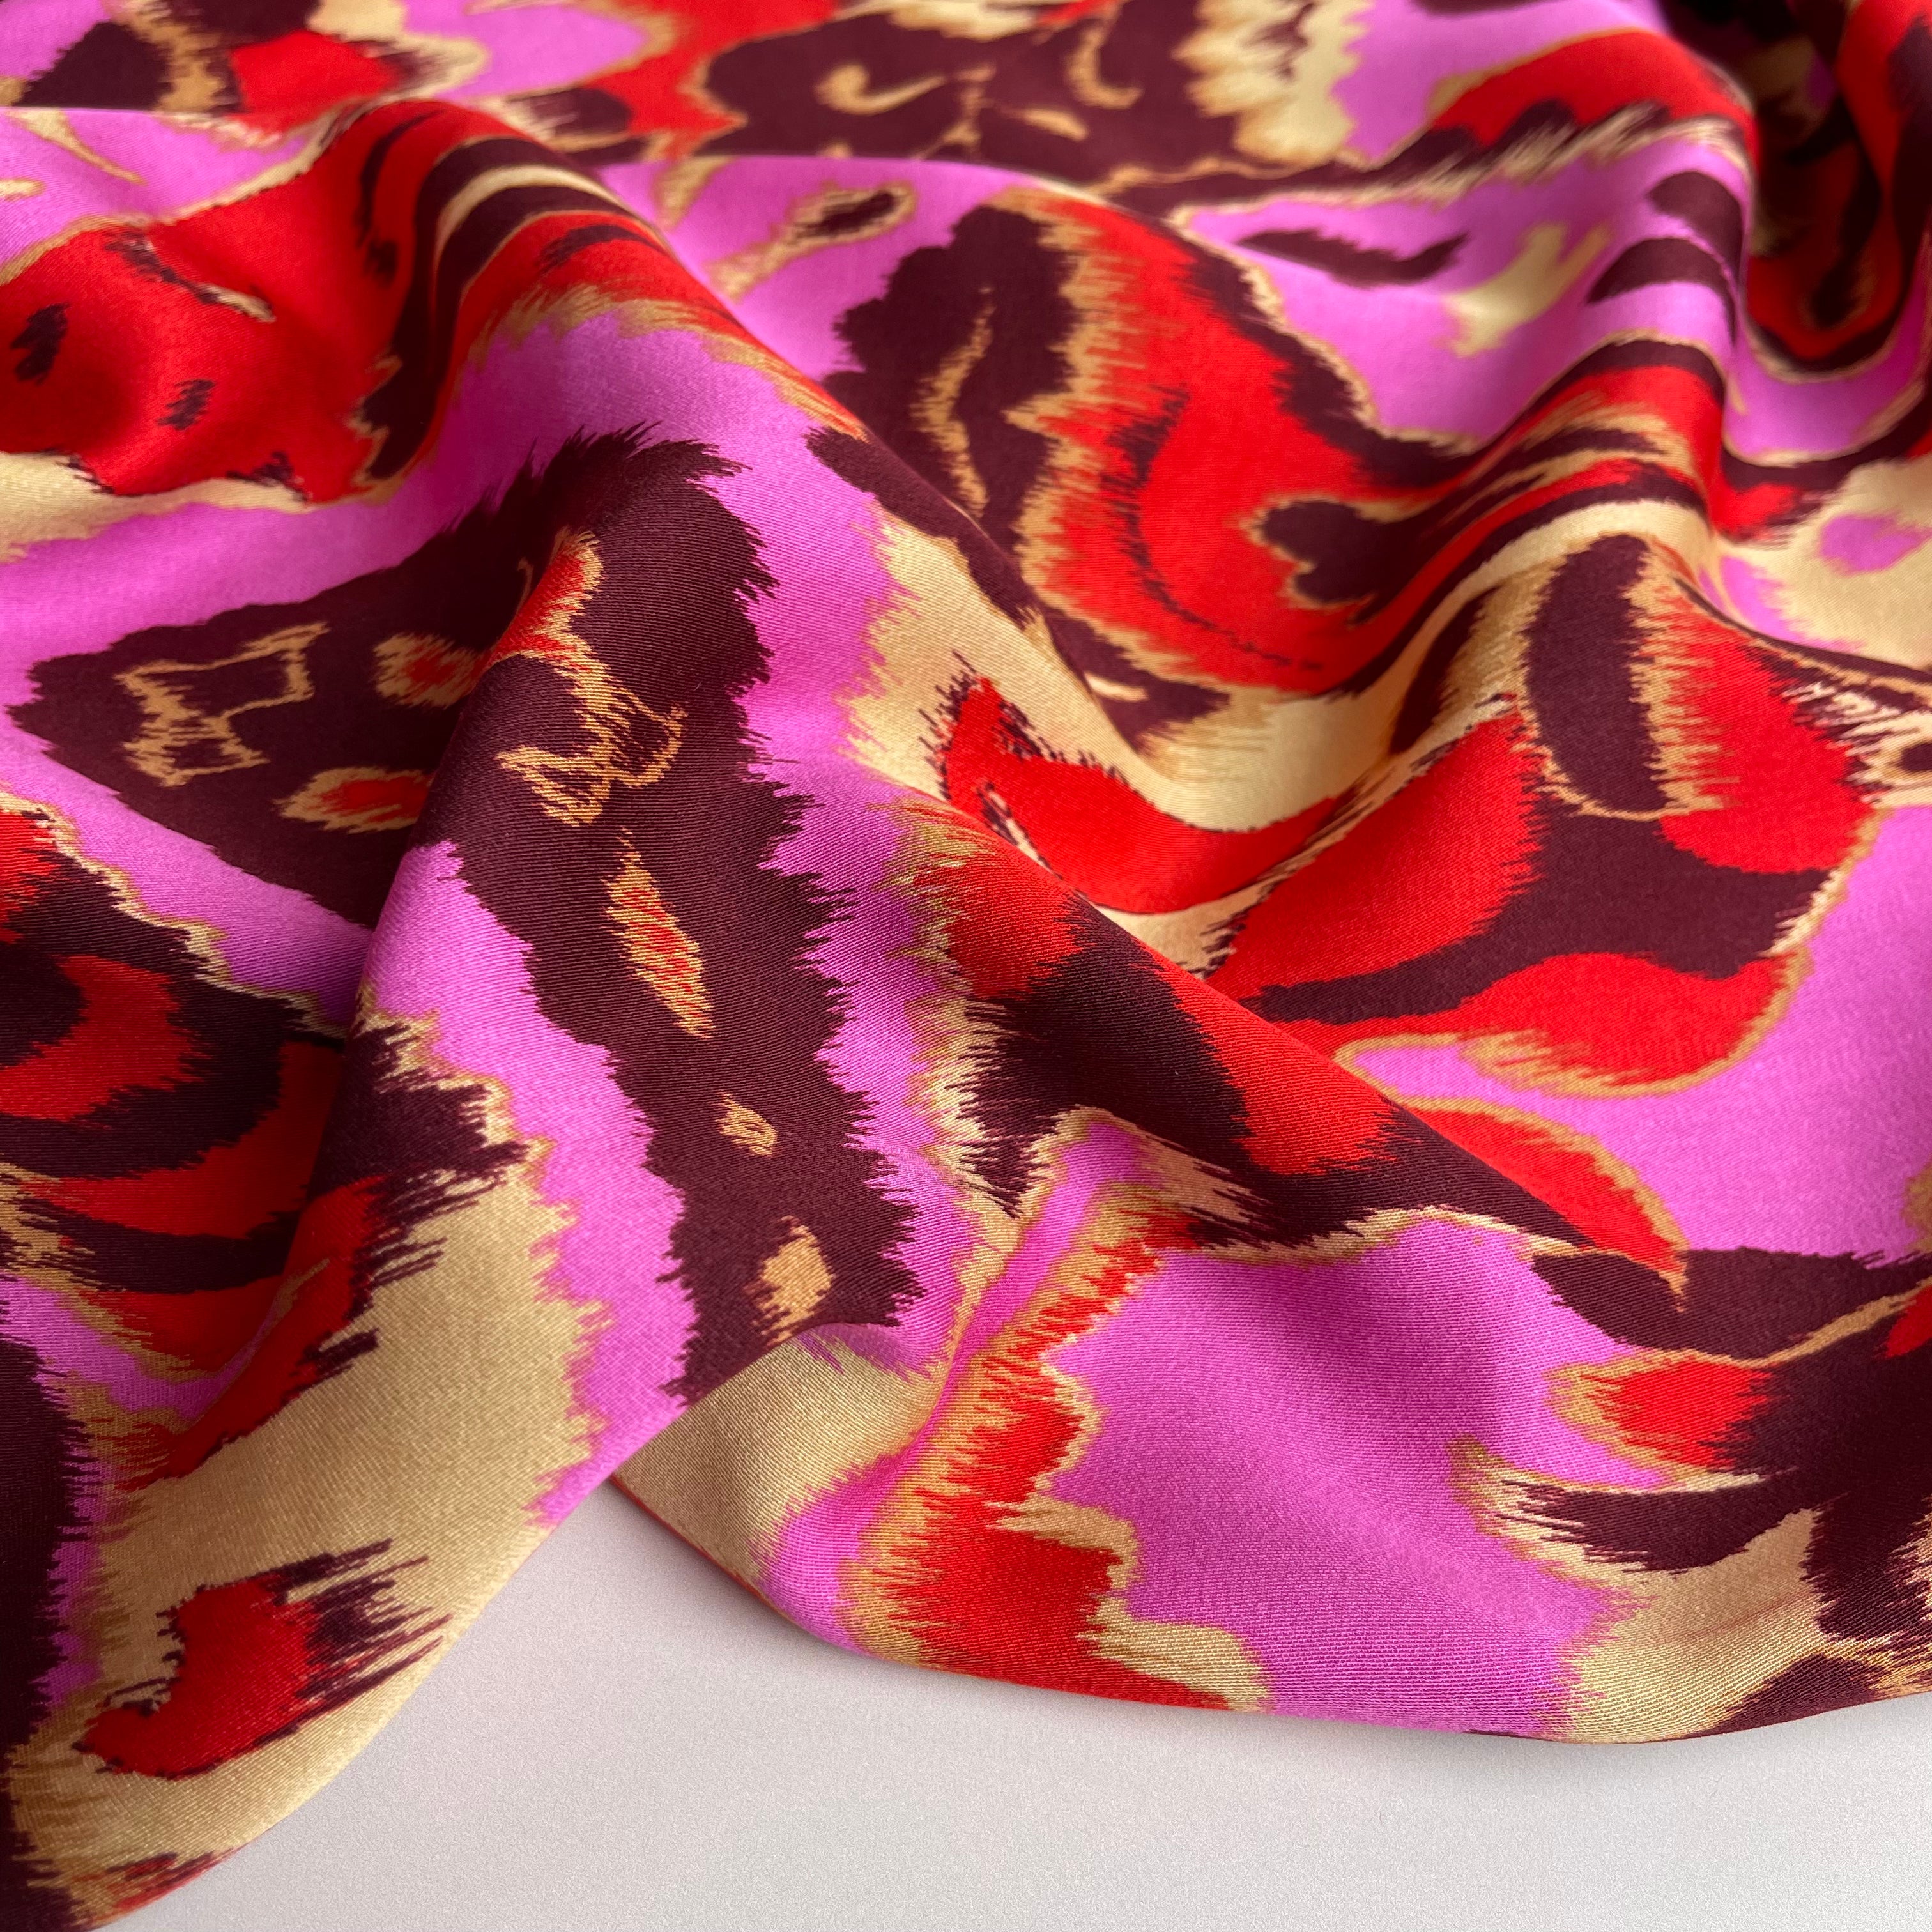 REMNANT 0.79 Metre - Hazy Paisley Pink and Red Viscose Sateen Fabric